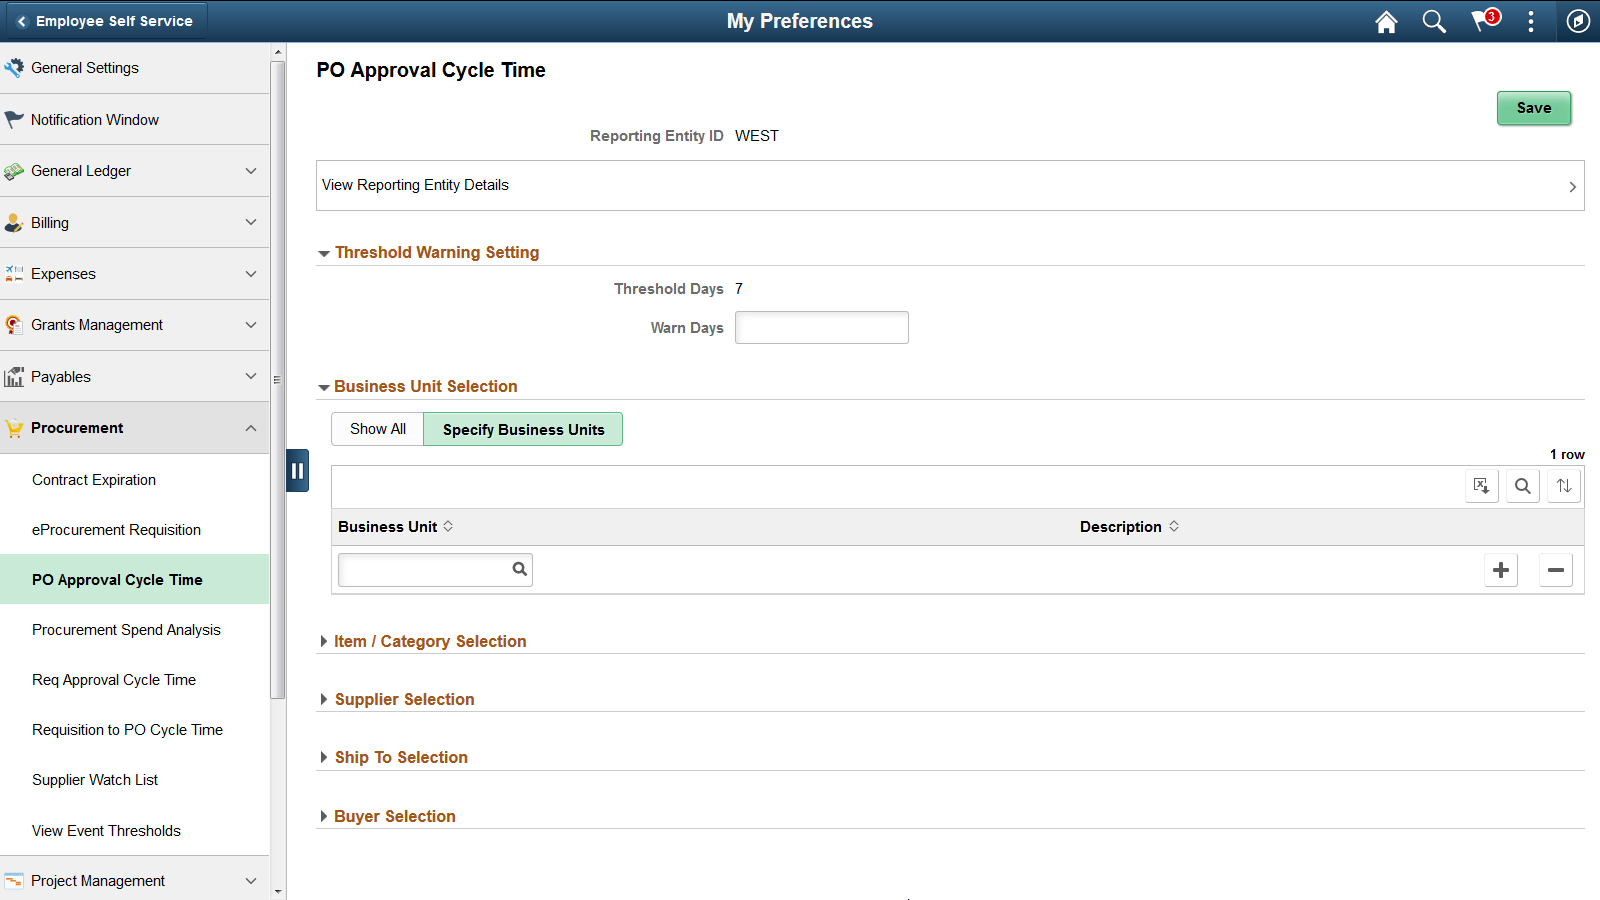 Procurement User Preferences - PO Approval Cycle Time